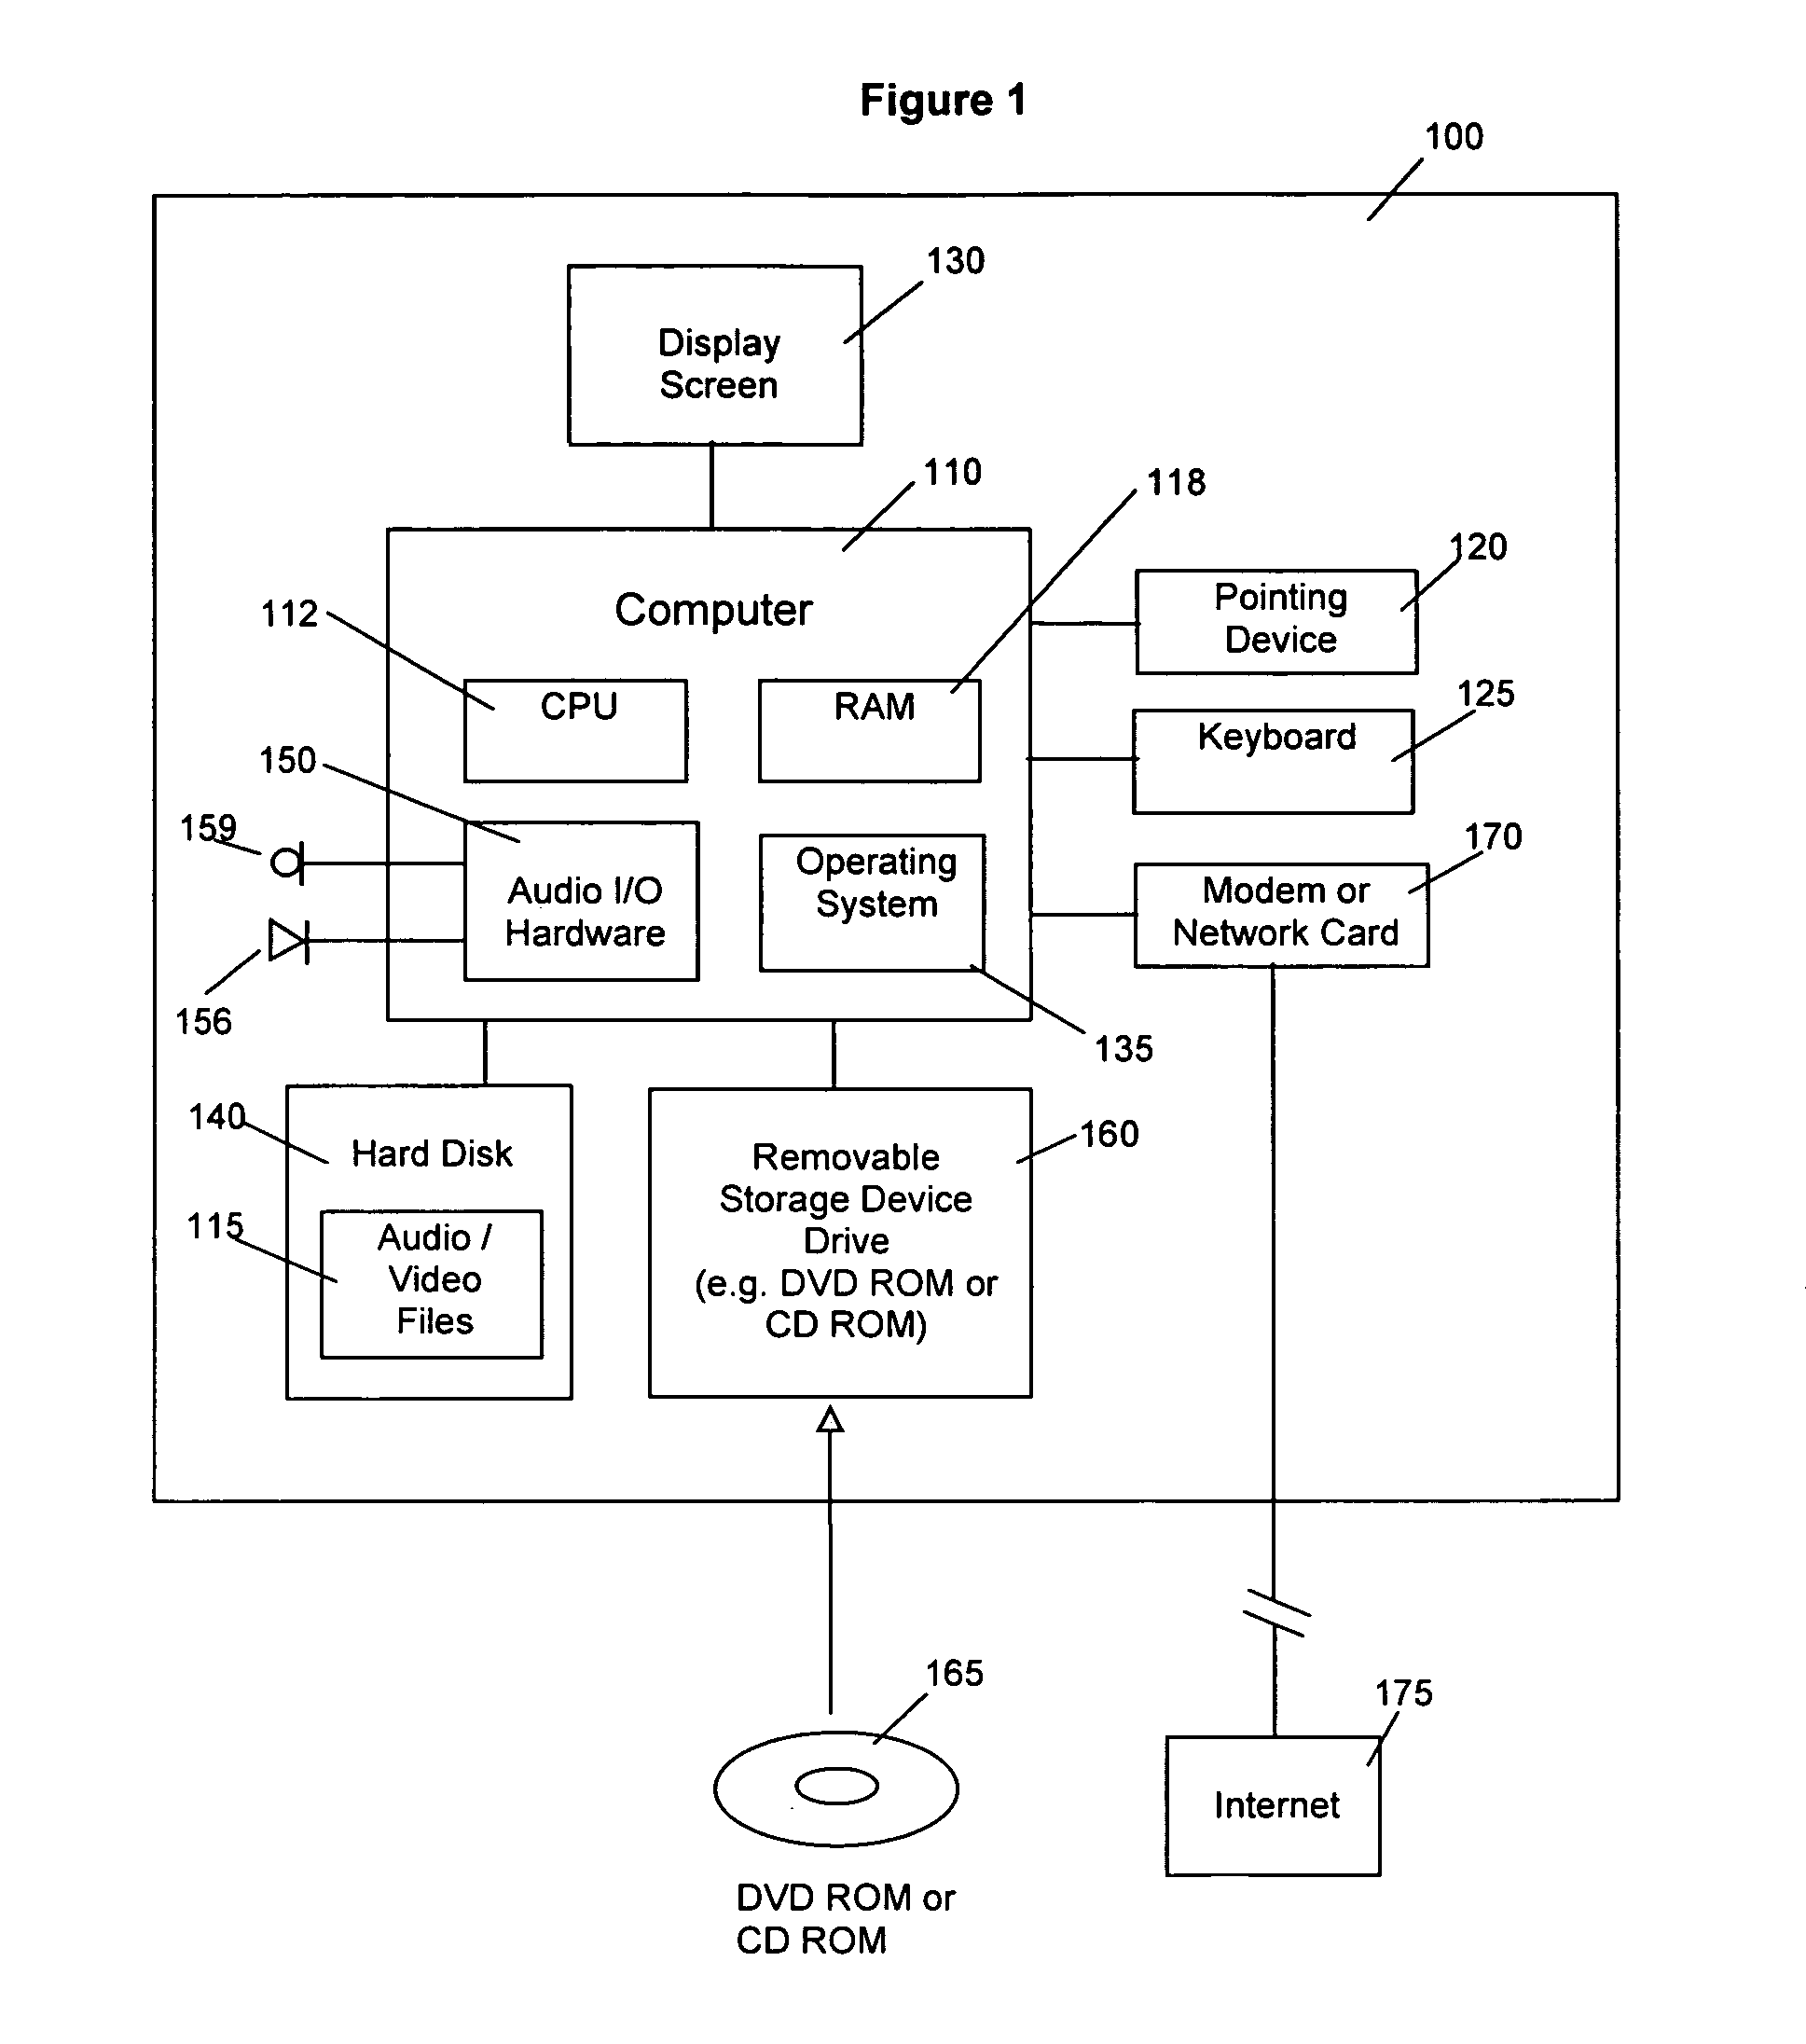 Methods and apparatus for use in sound replacement with automatic synchronization to images